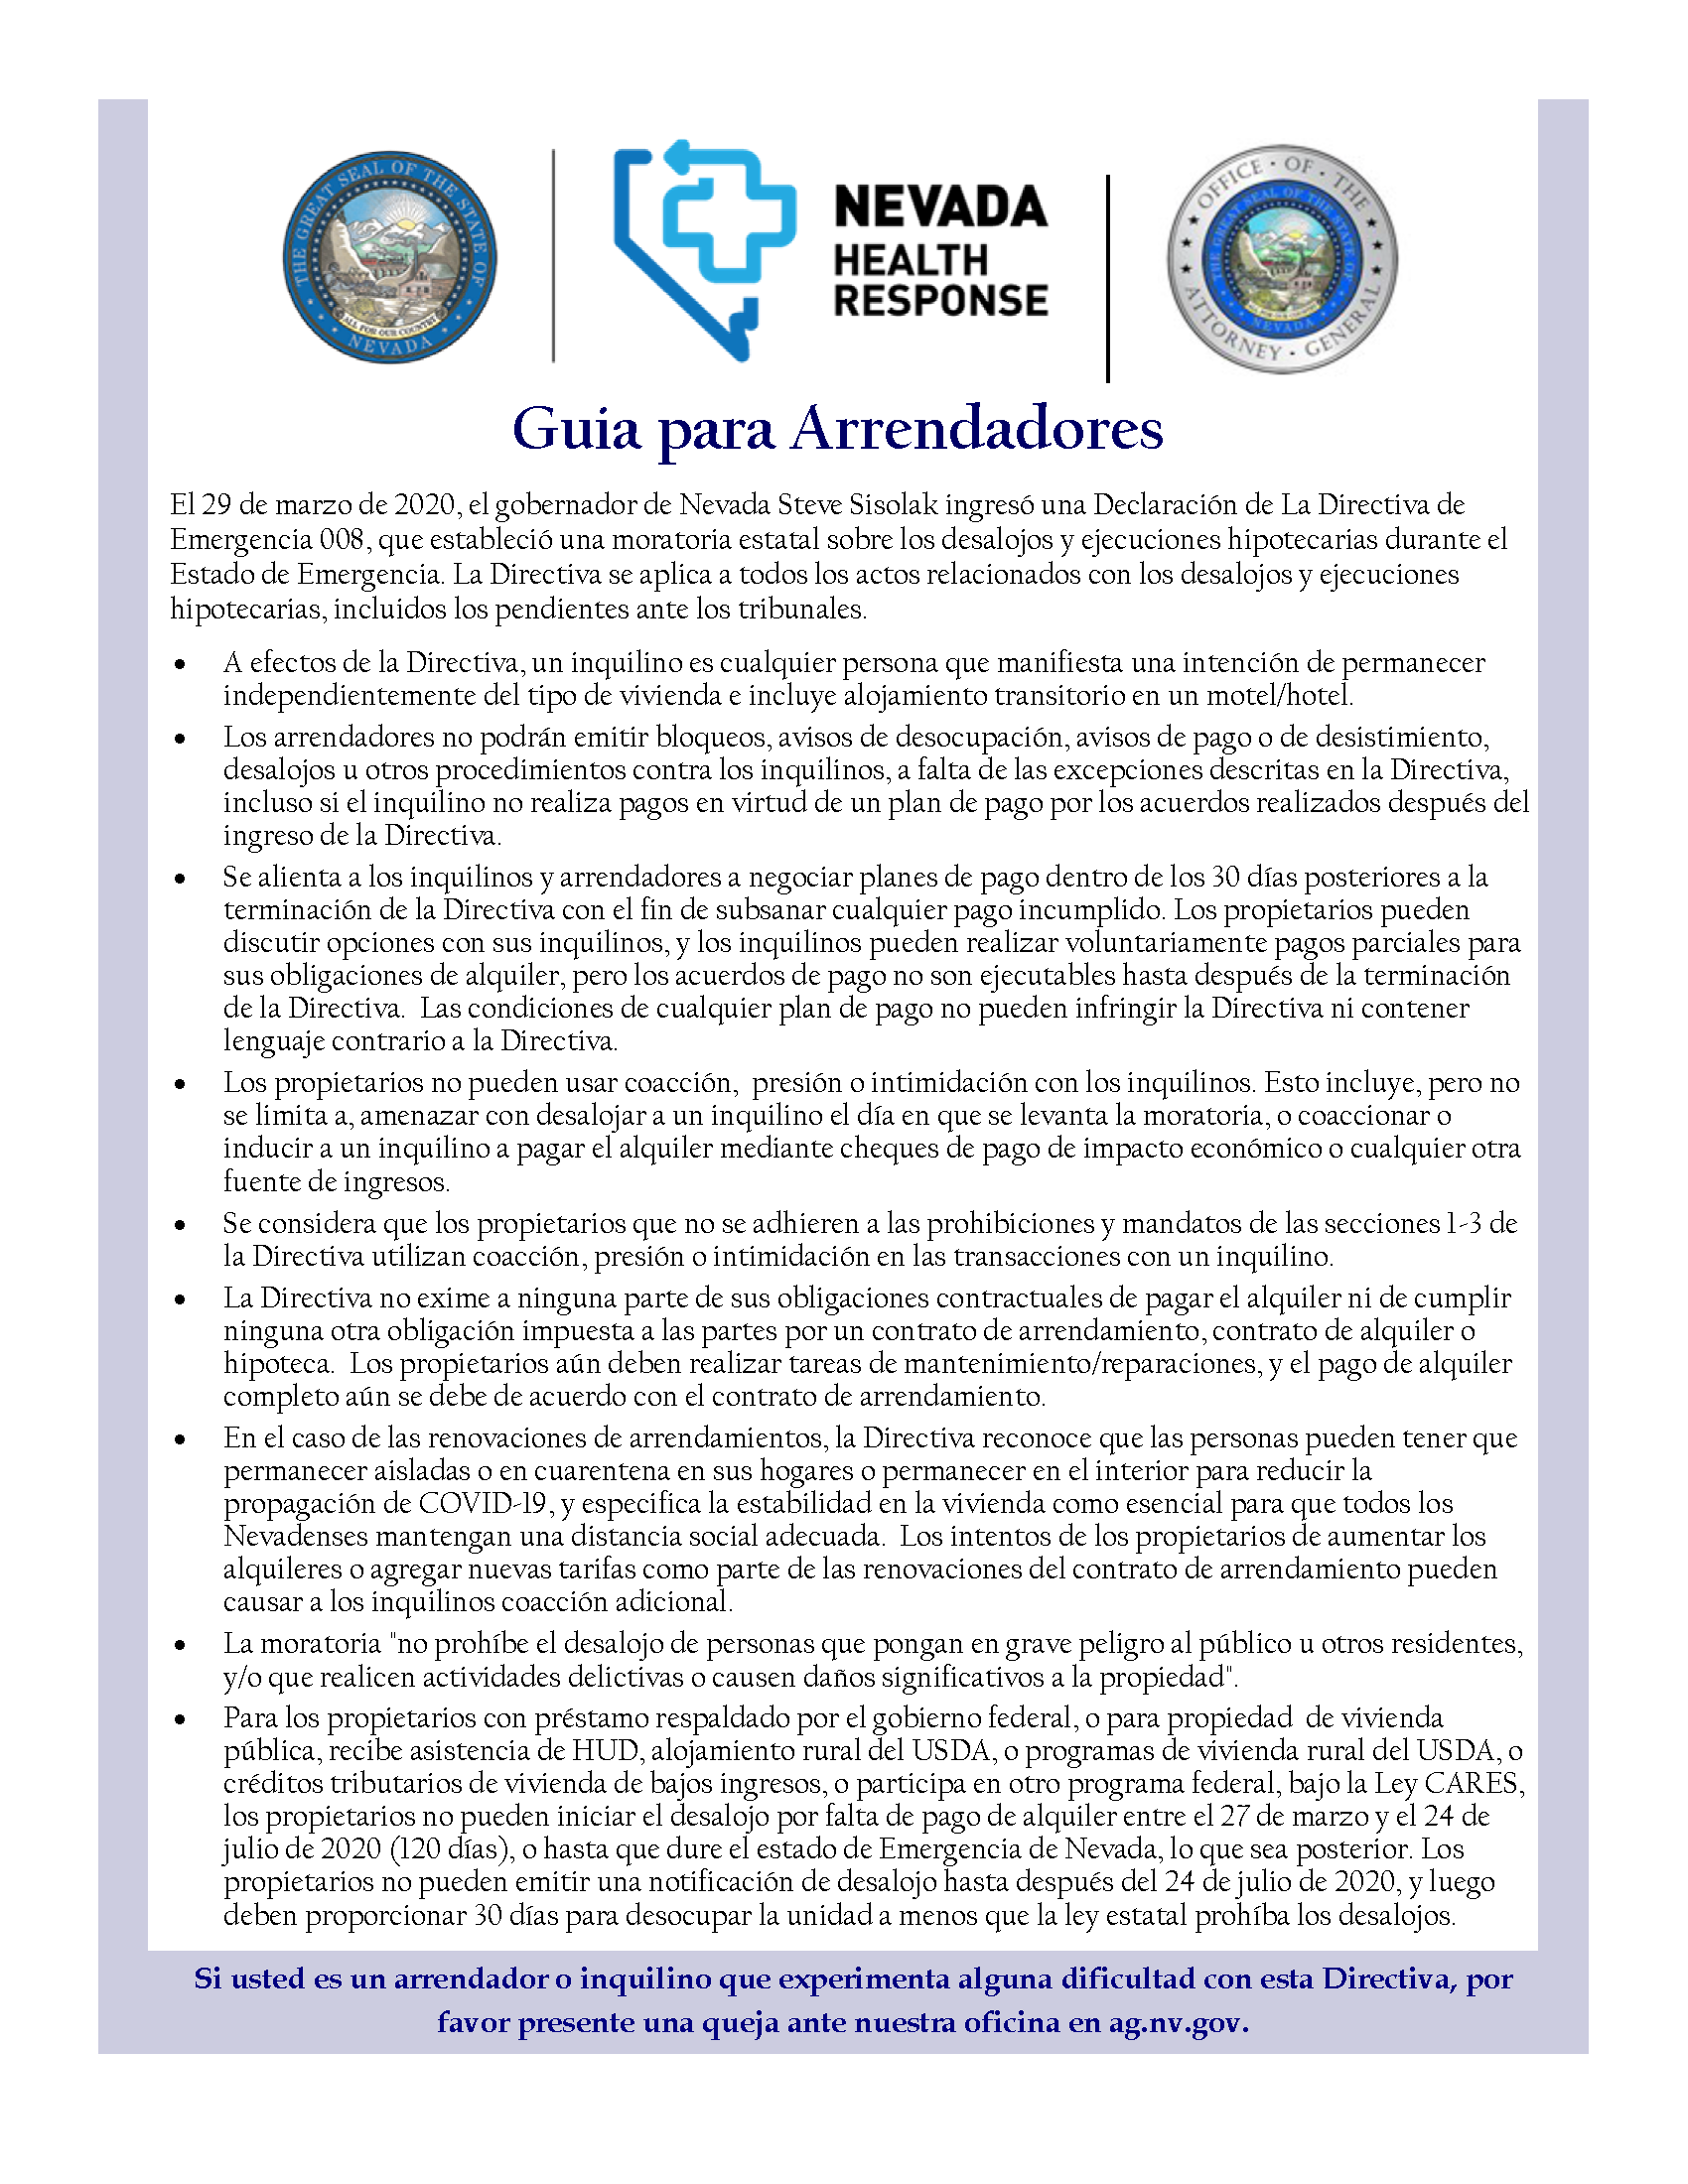 Landlord Guidance Flyer SPANISH.png